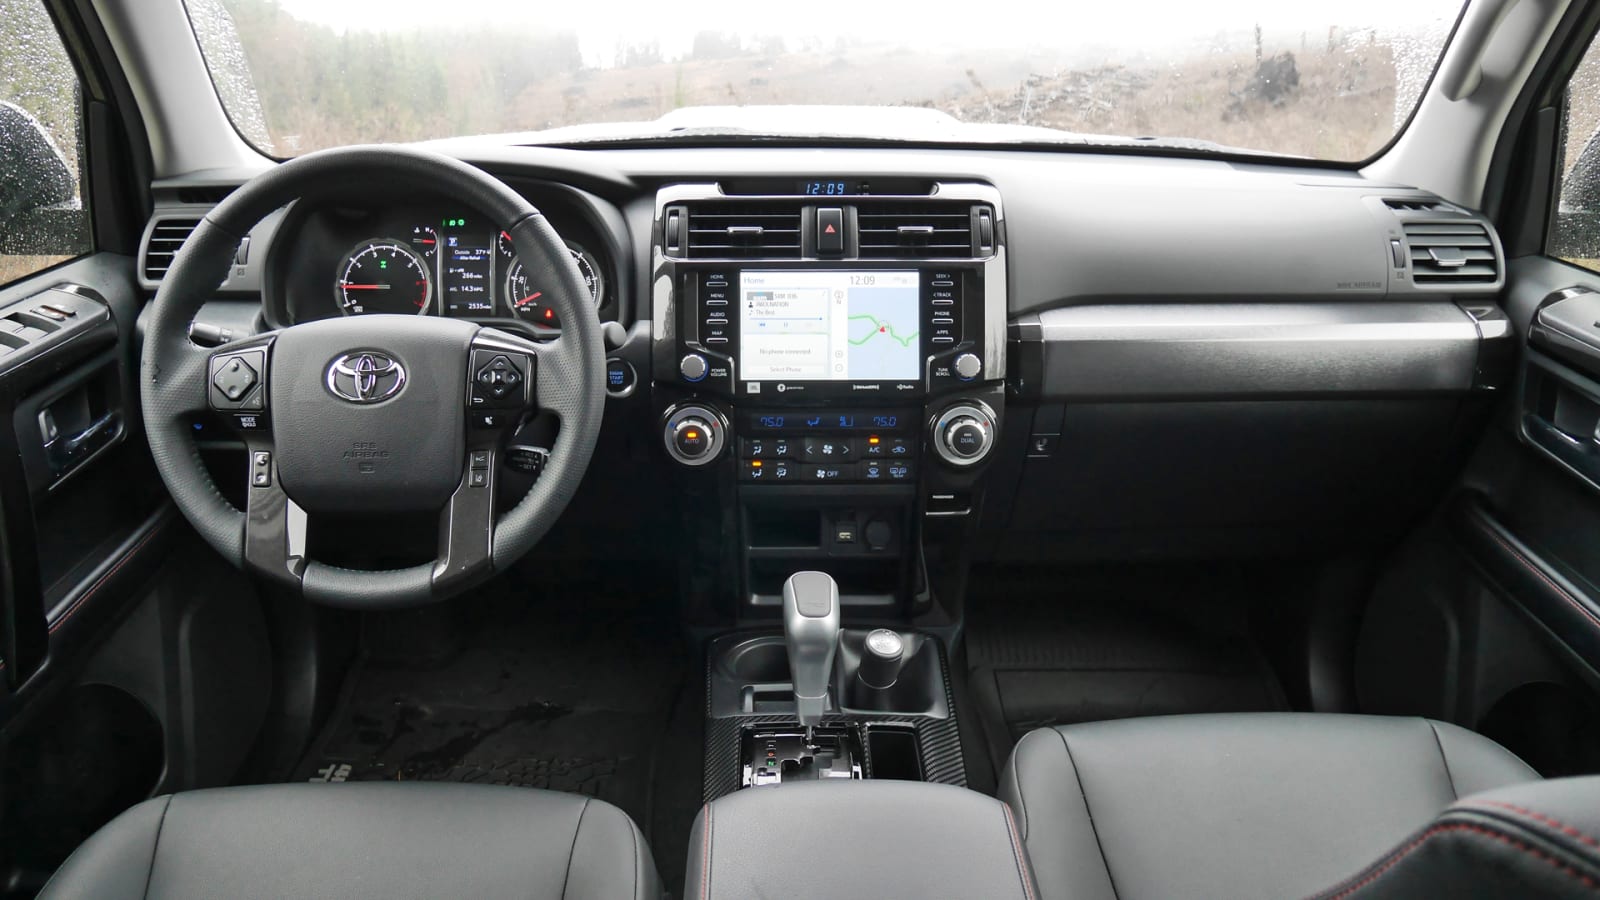 Aggregate 97+ about toyota 4runner trd pro interior super cool in